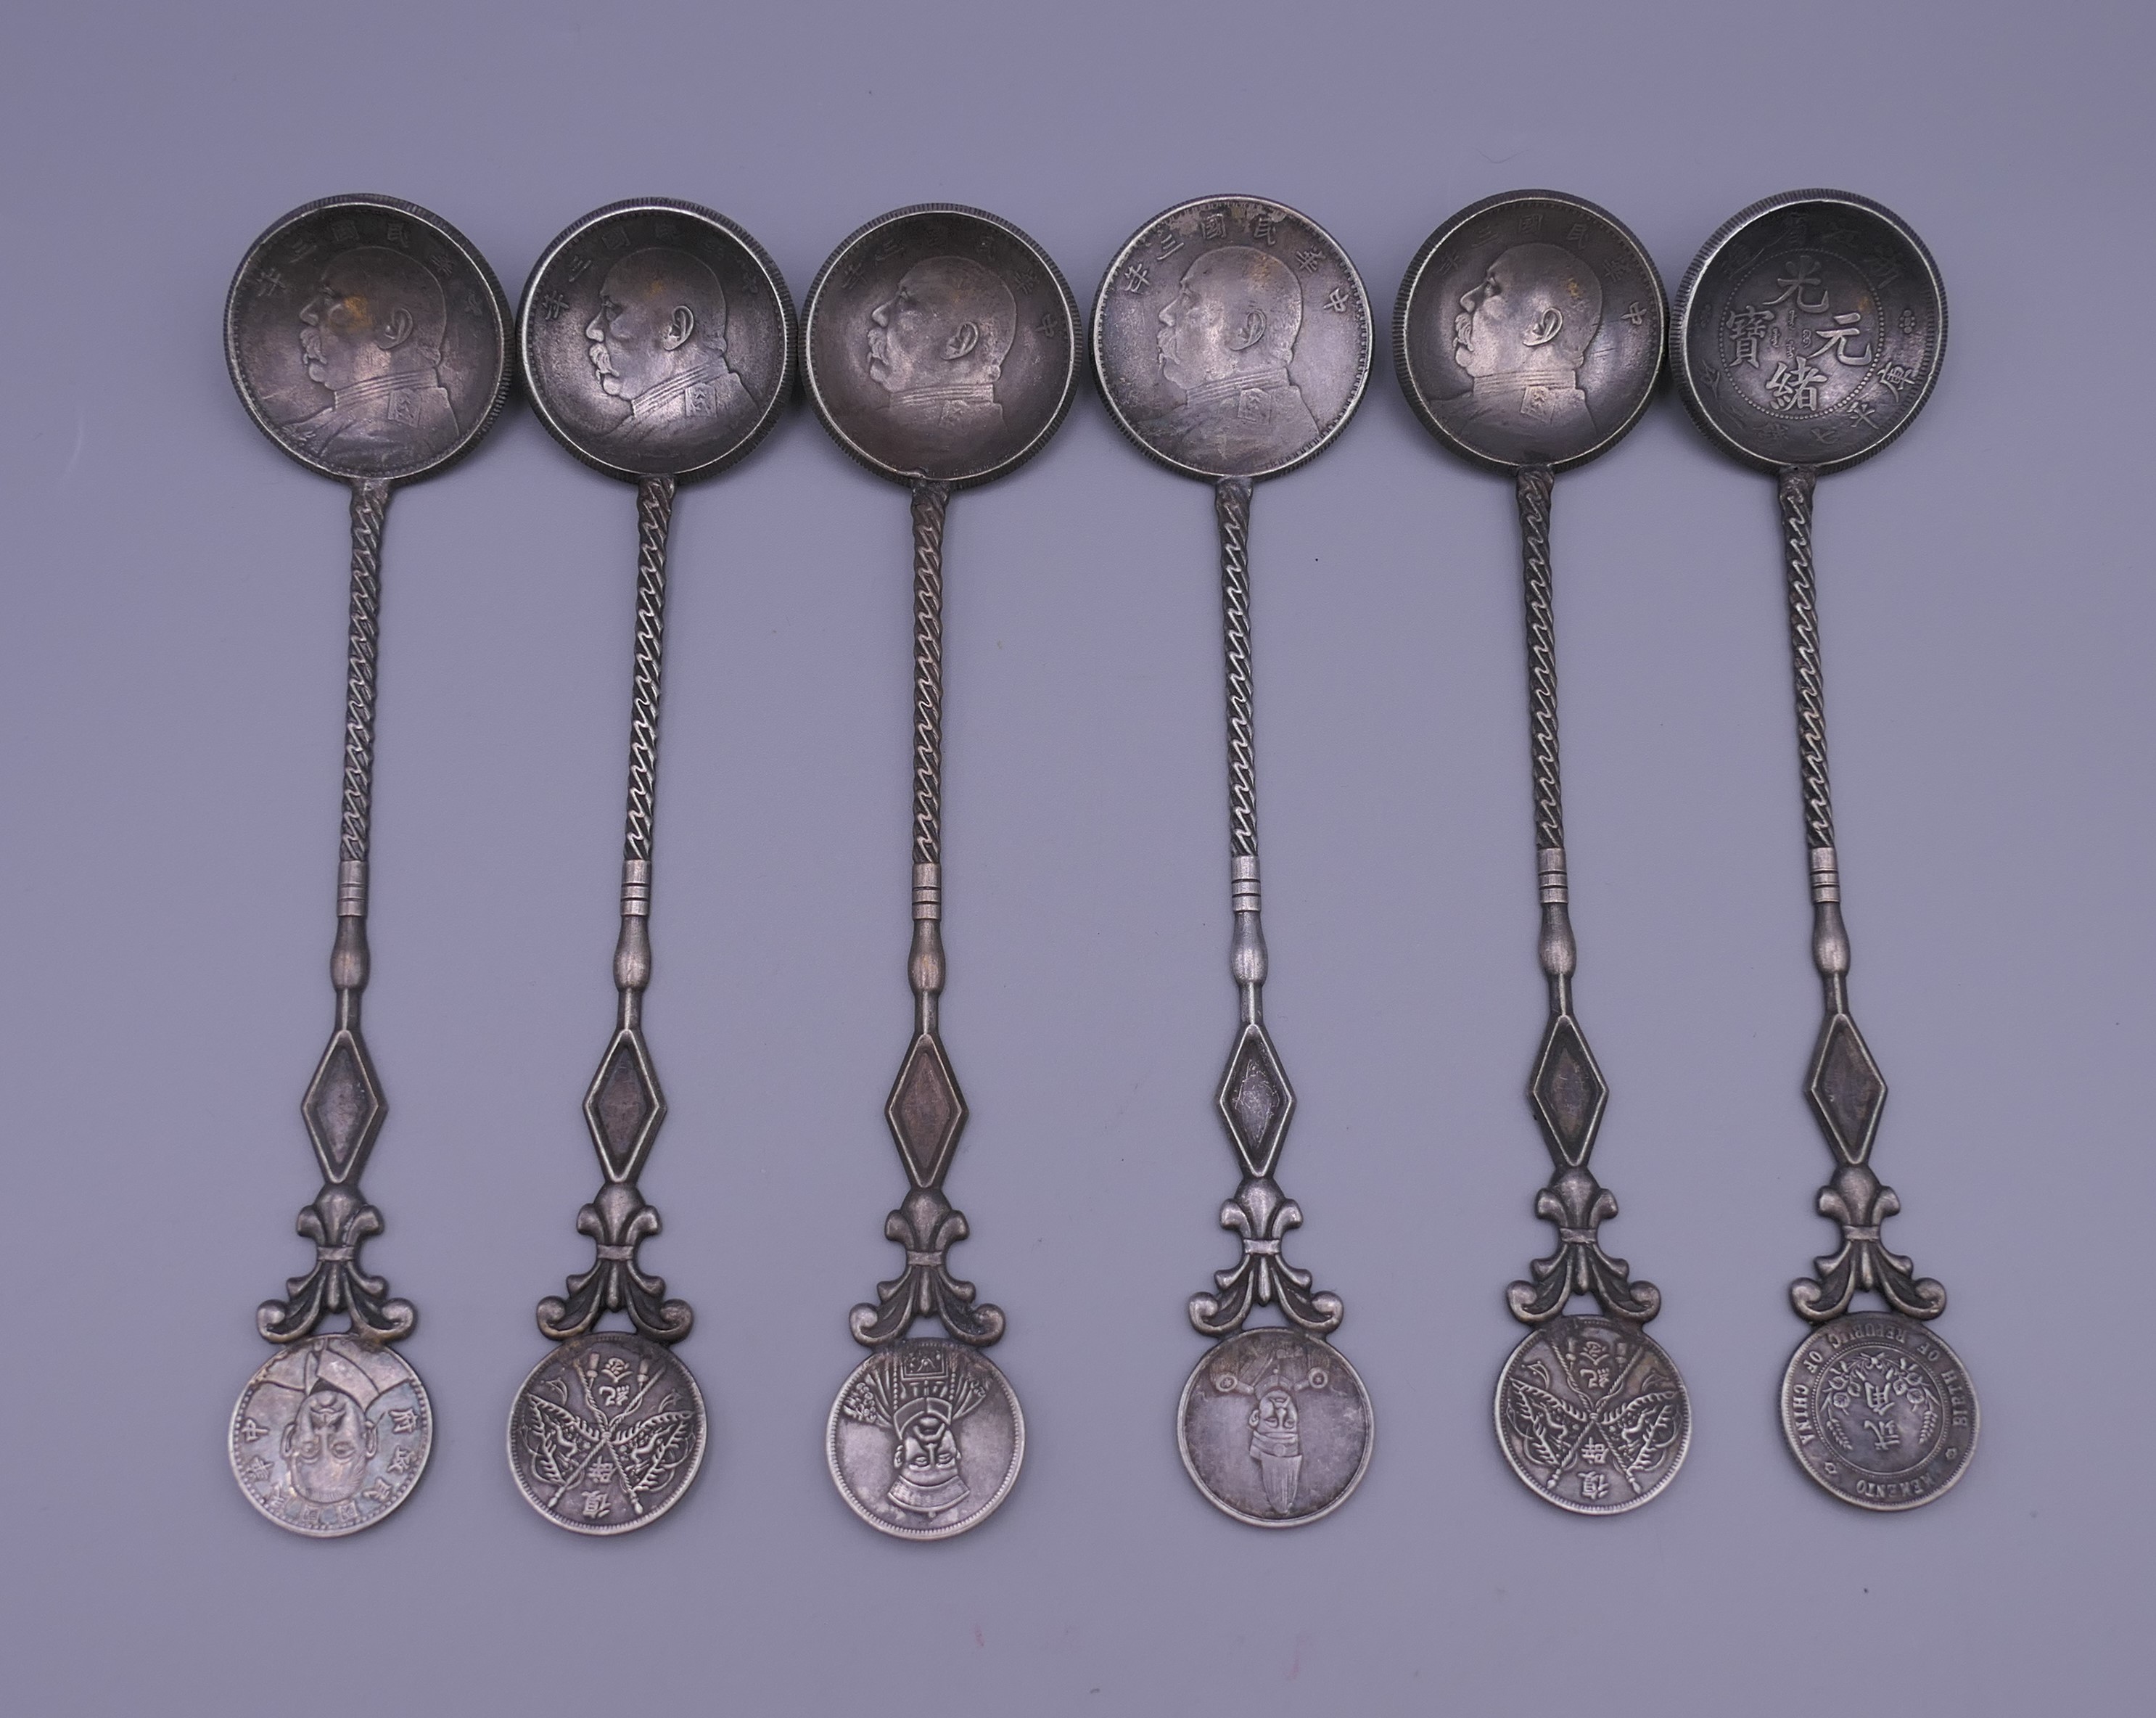 Six Chinese silver coin spoons. 17 cm long.